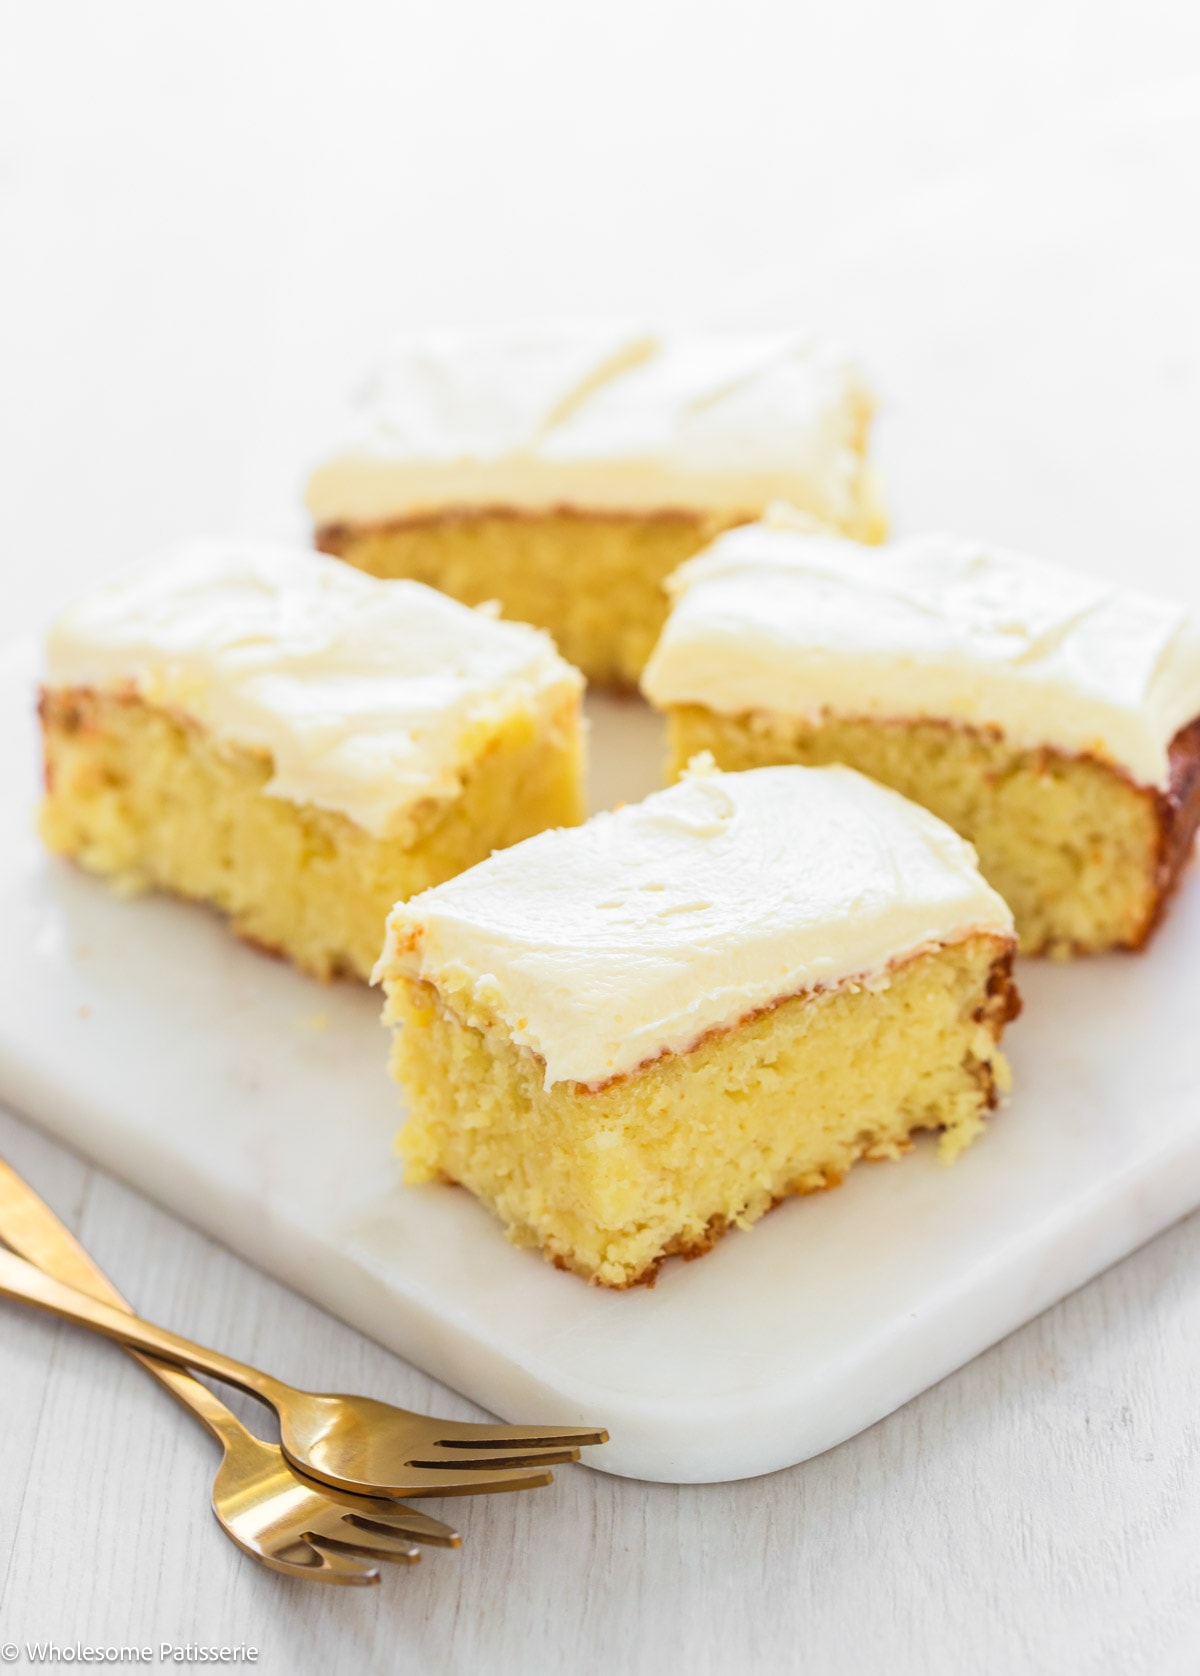 Cake mix pineapple cake slices with cream cheese frosting sitting on white platter.